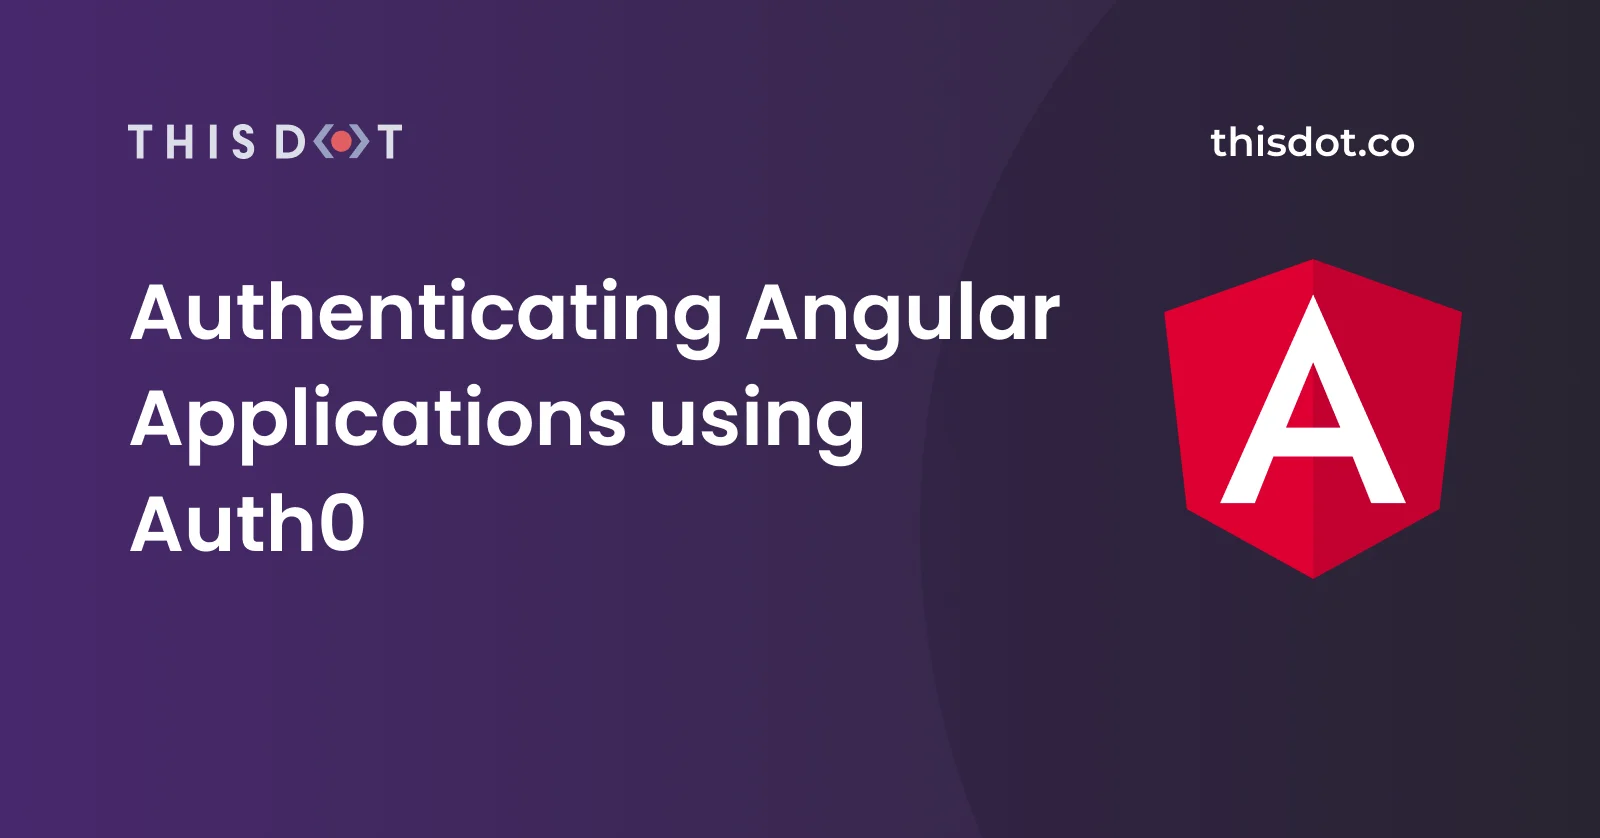 Authenticating Angular Applications using Auth0 (1)